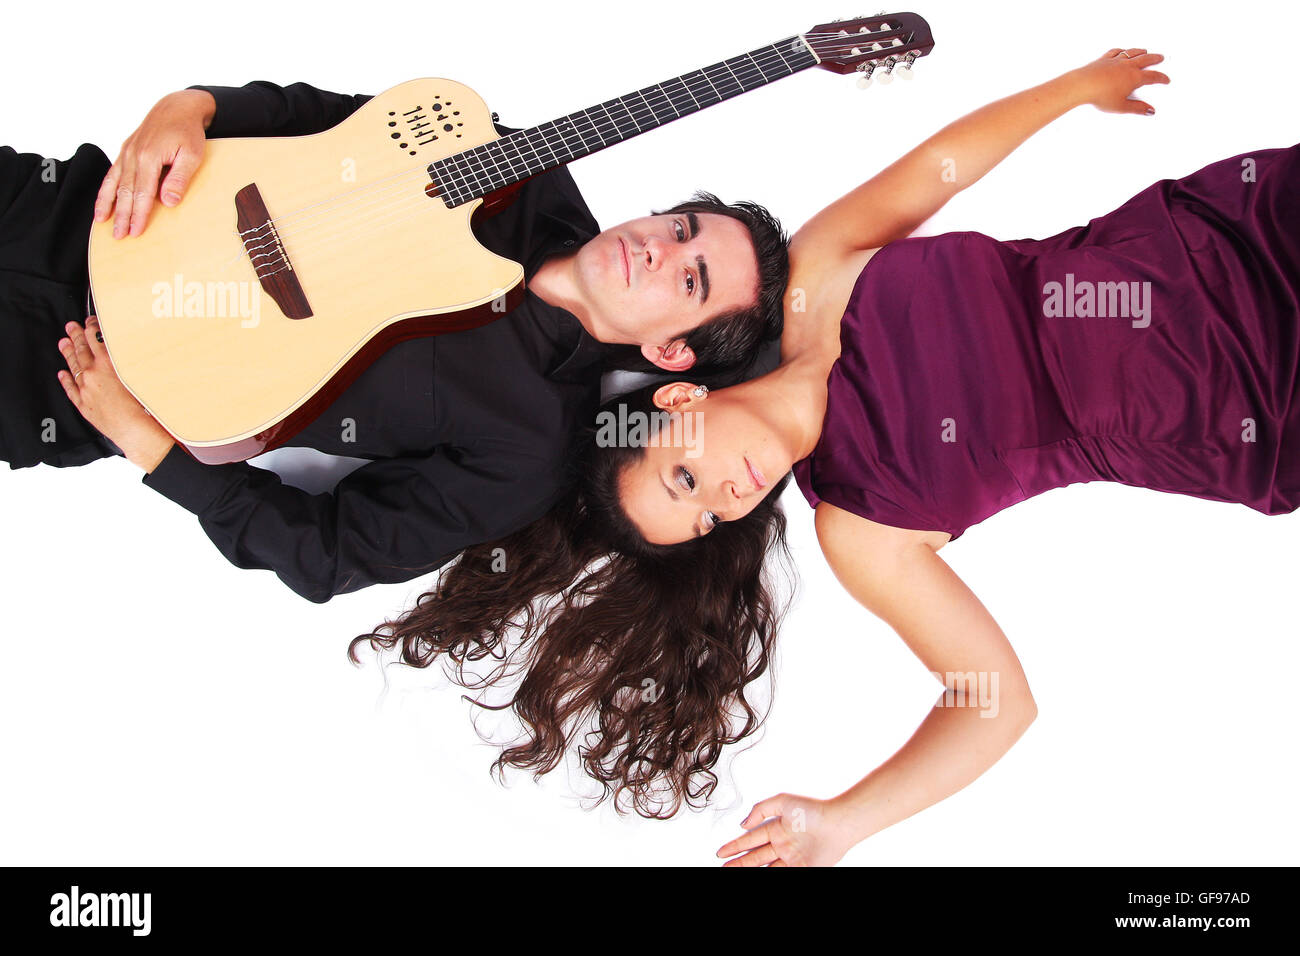 A female singer and a male guitarrist laying down in white background Stock Photo